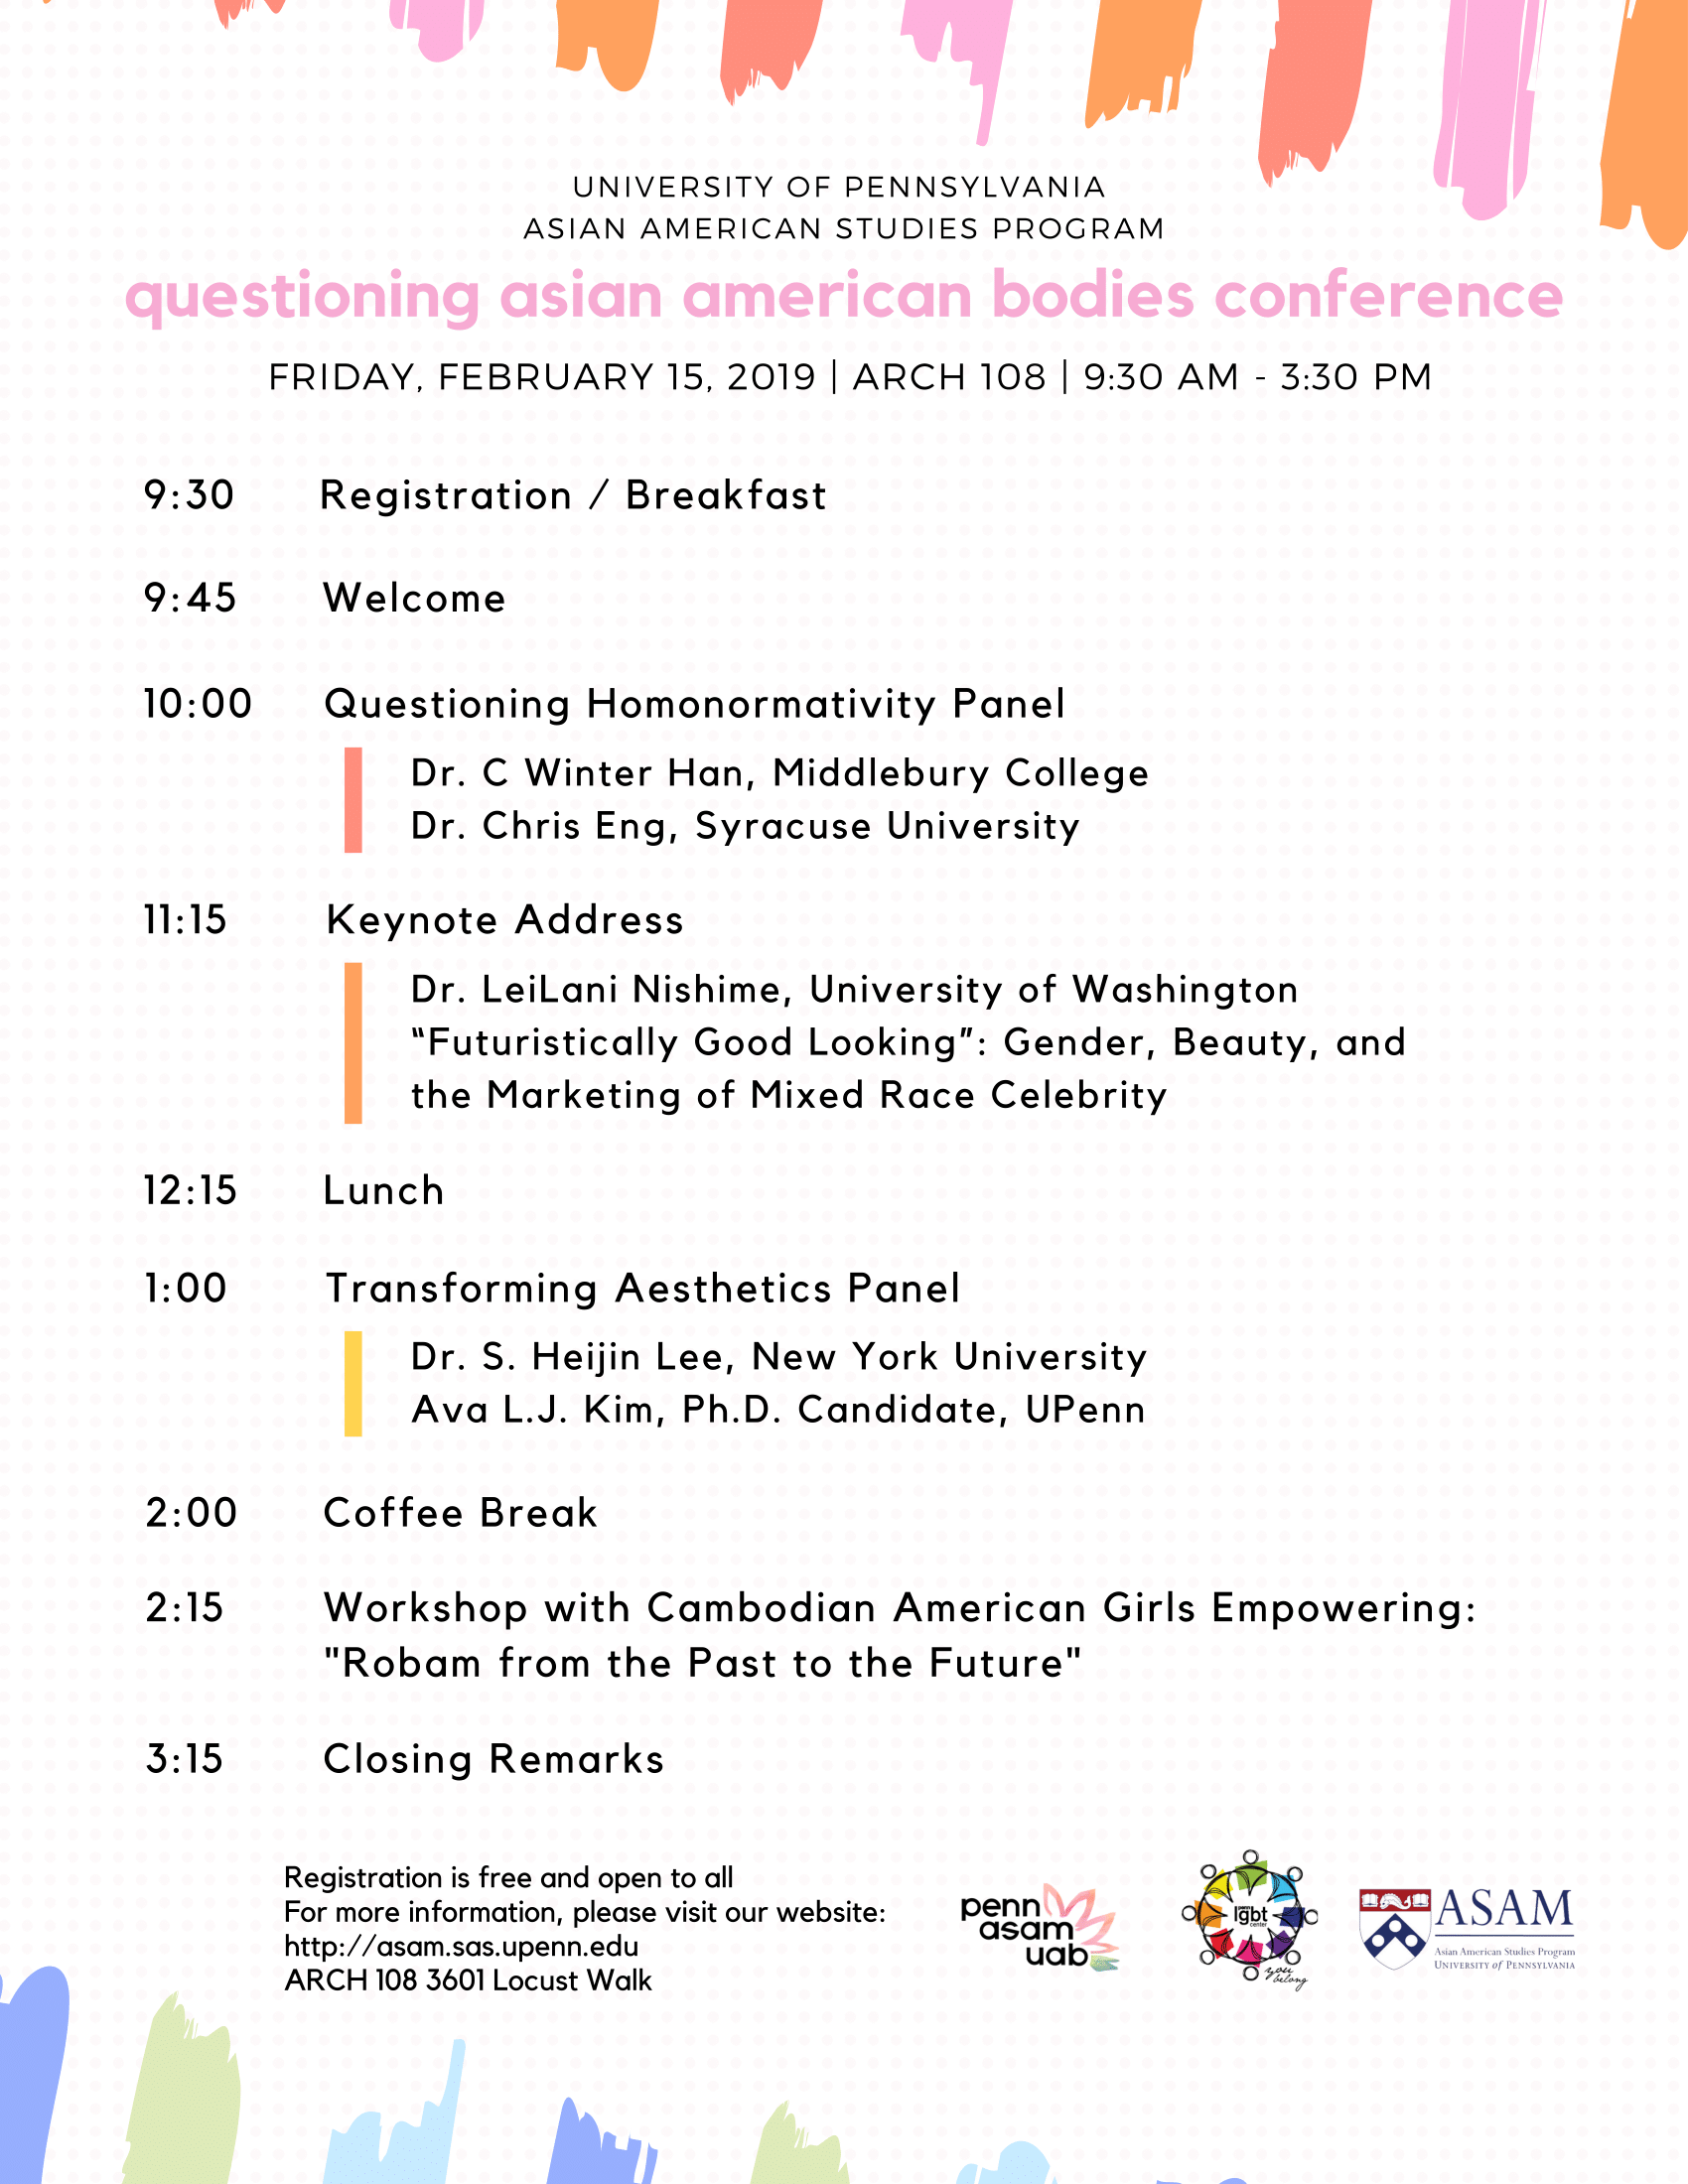 Asian American Bodies conference schedule